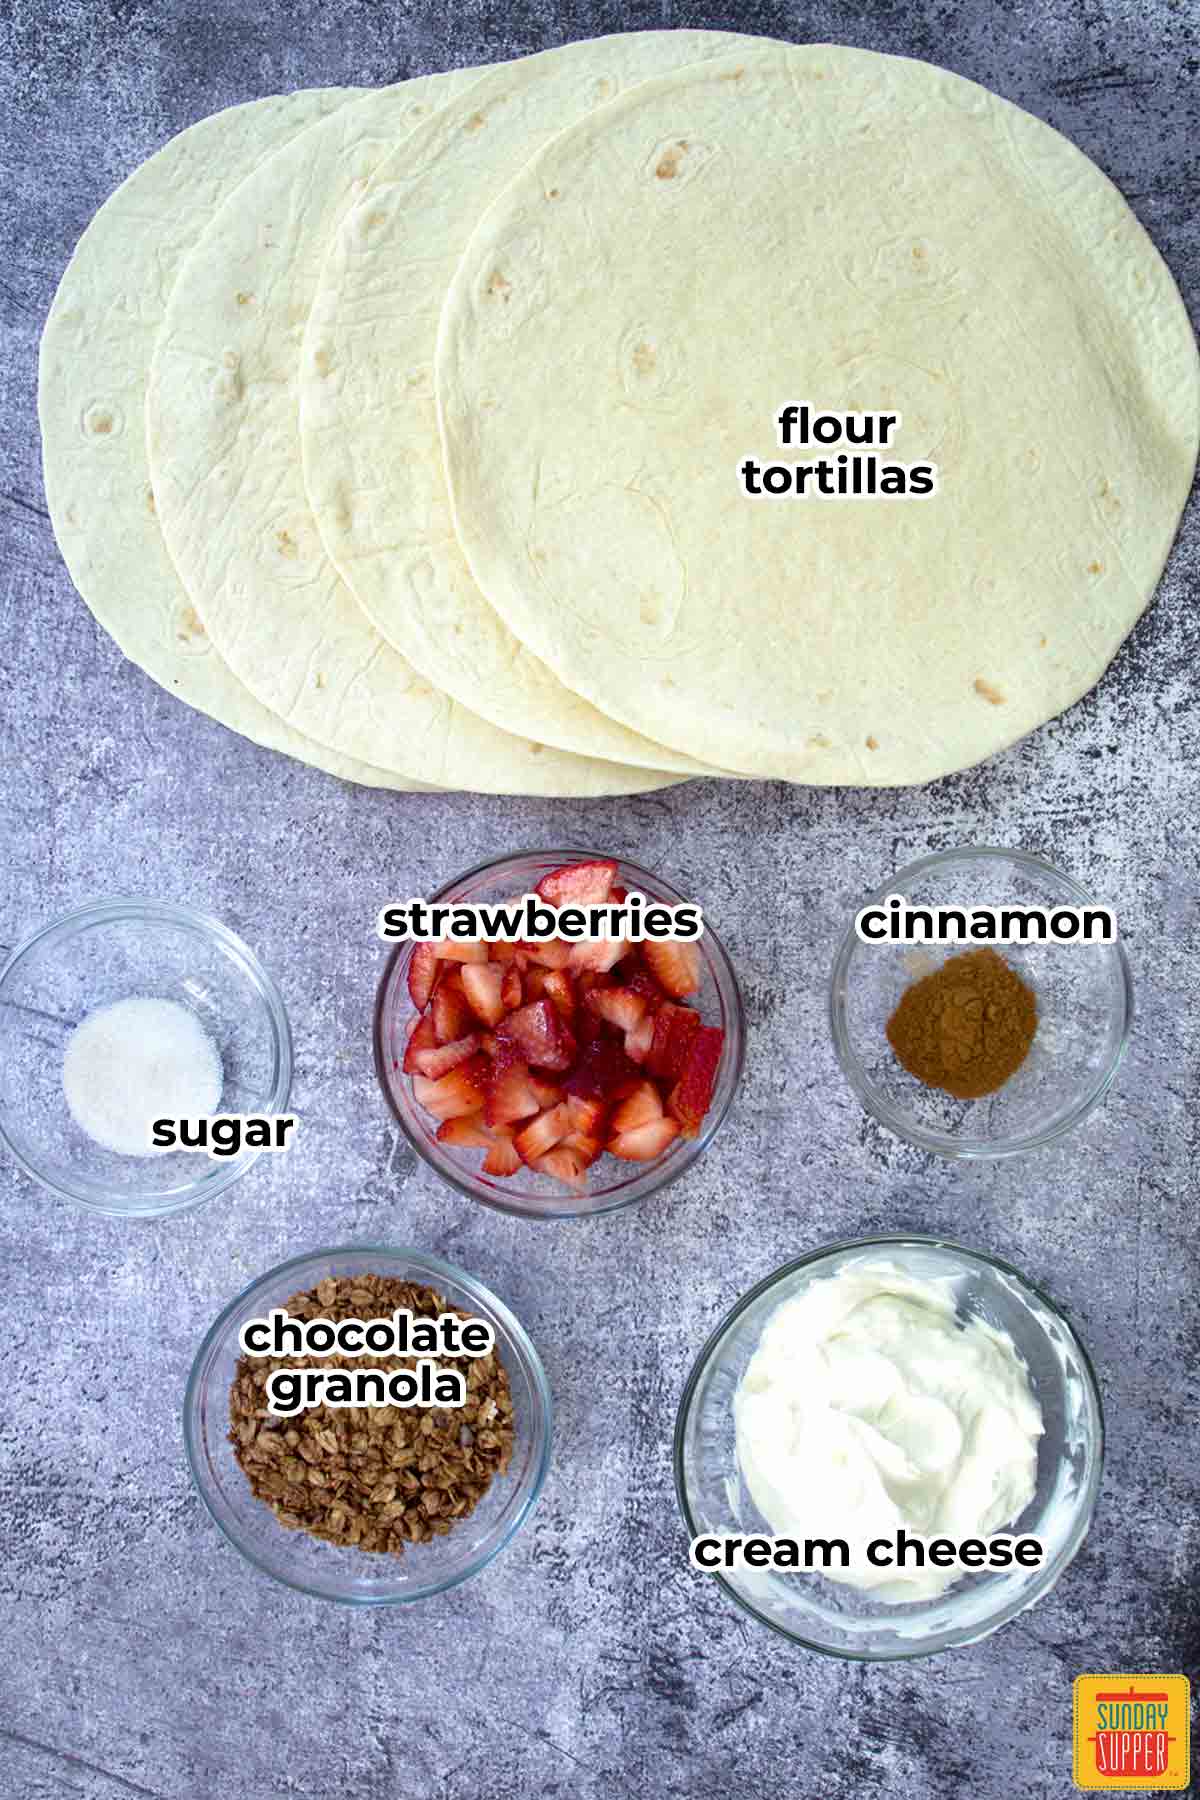 ingredients for strawberry cream cheese pinwheel sandwiches with labels